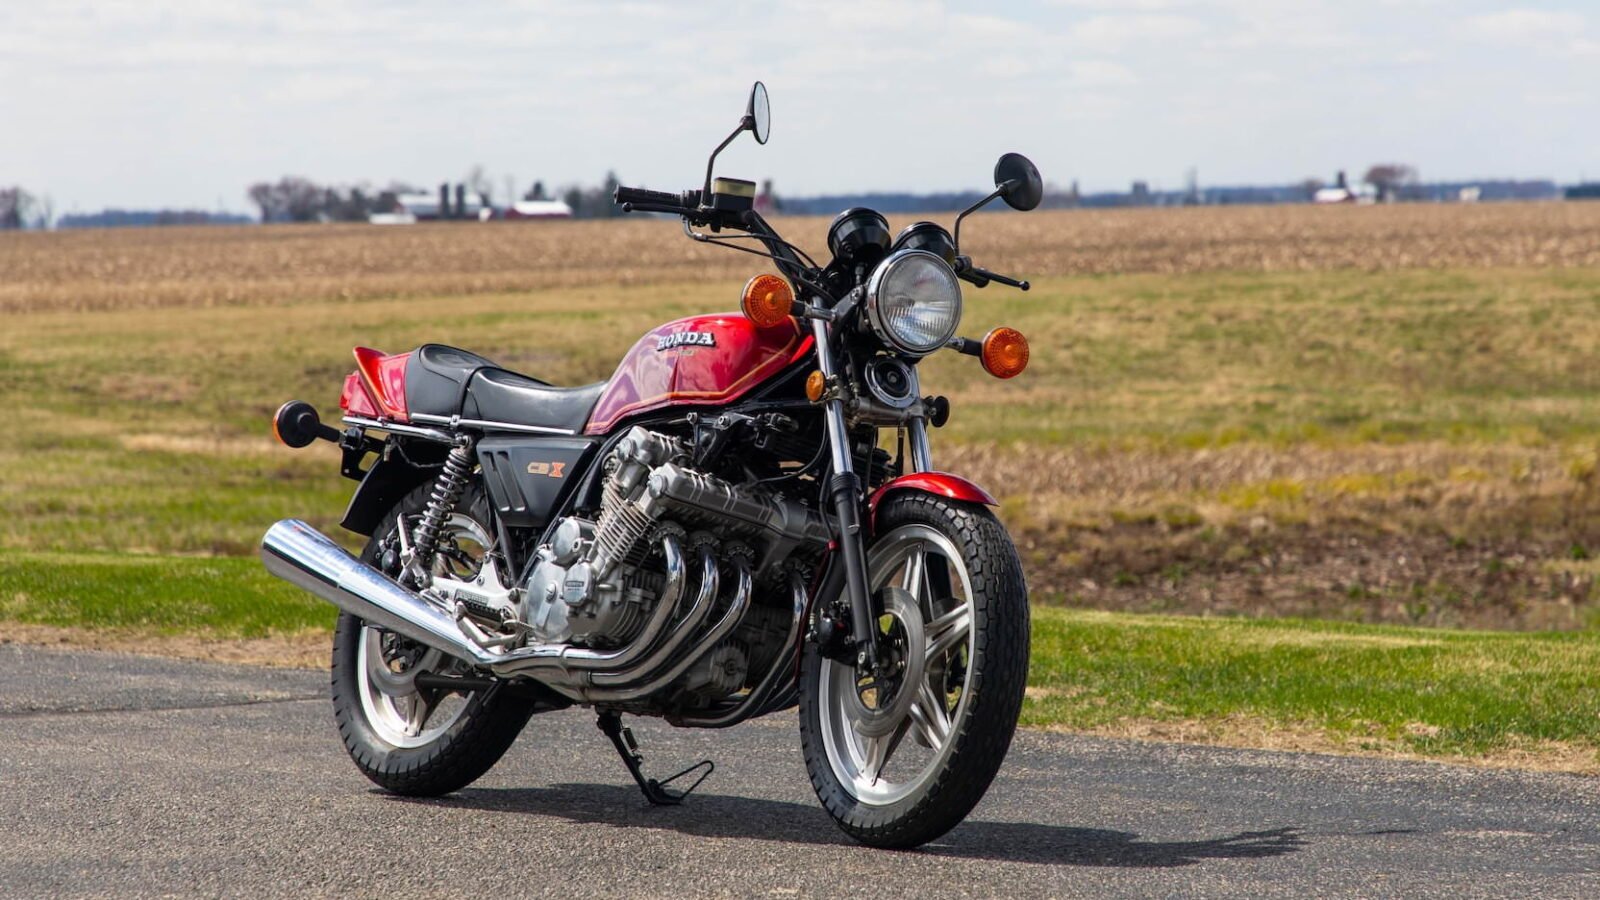 The Honda Cbx An Unusual Japanese Inline 6 Cylinder Motorcycle